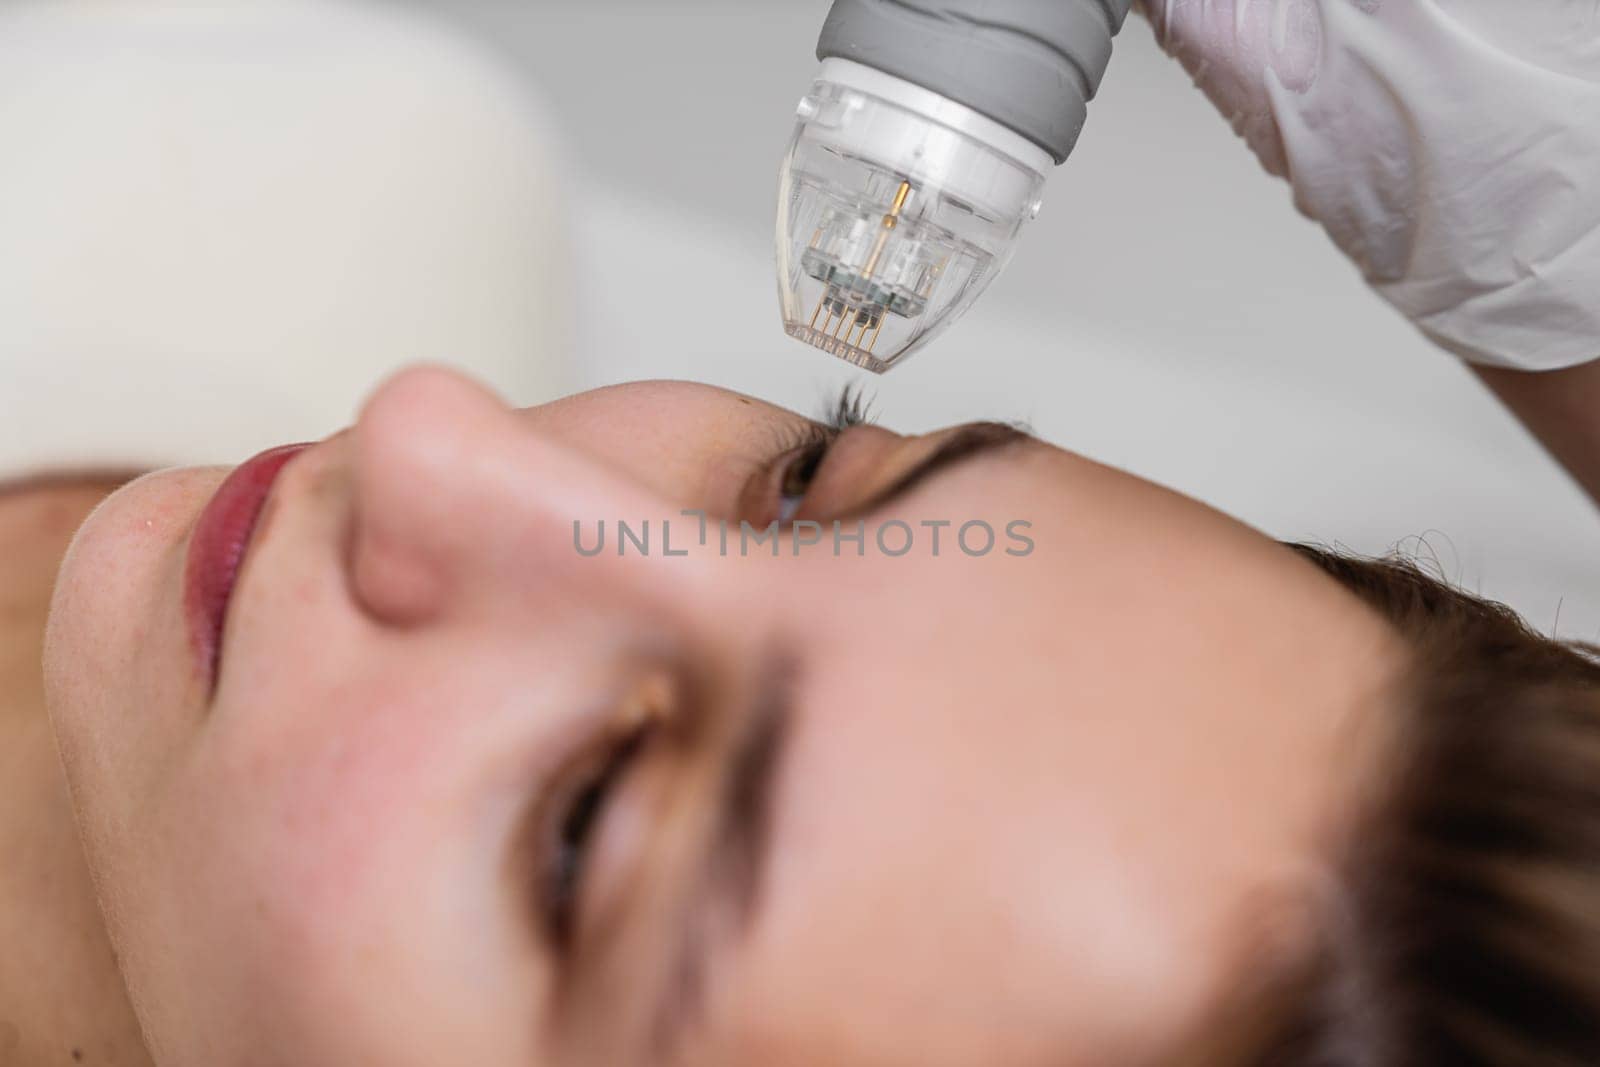 A woman is undergoing a laser treatment on her eye, with the help of a specialist ensuring safety and precision.